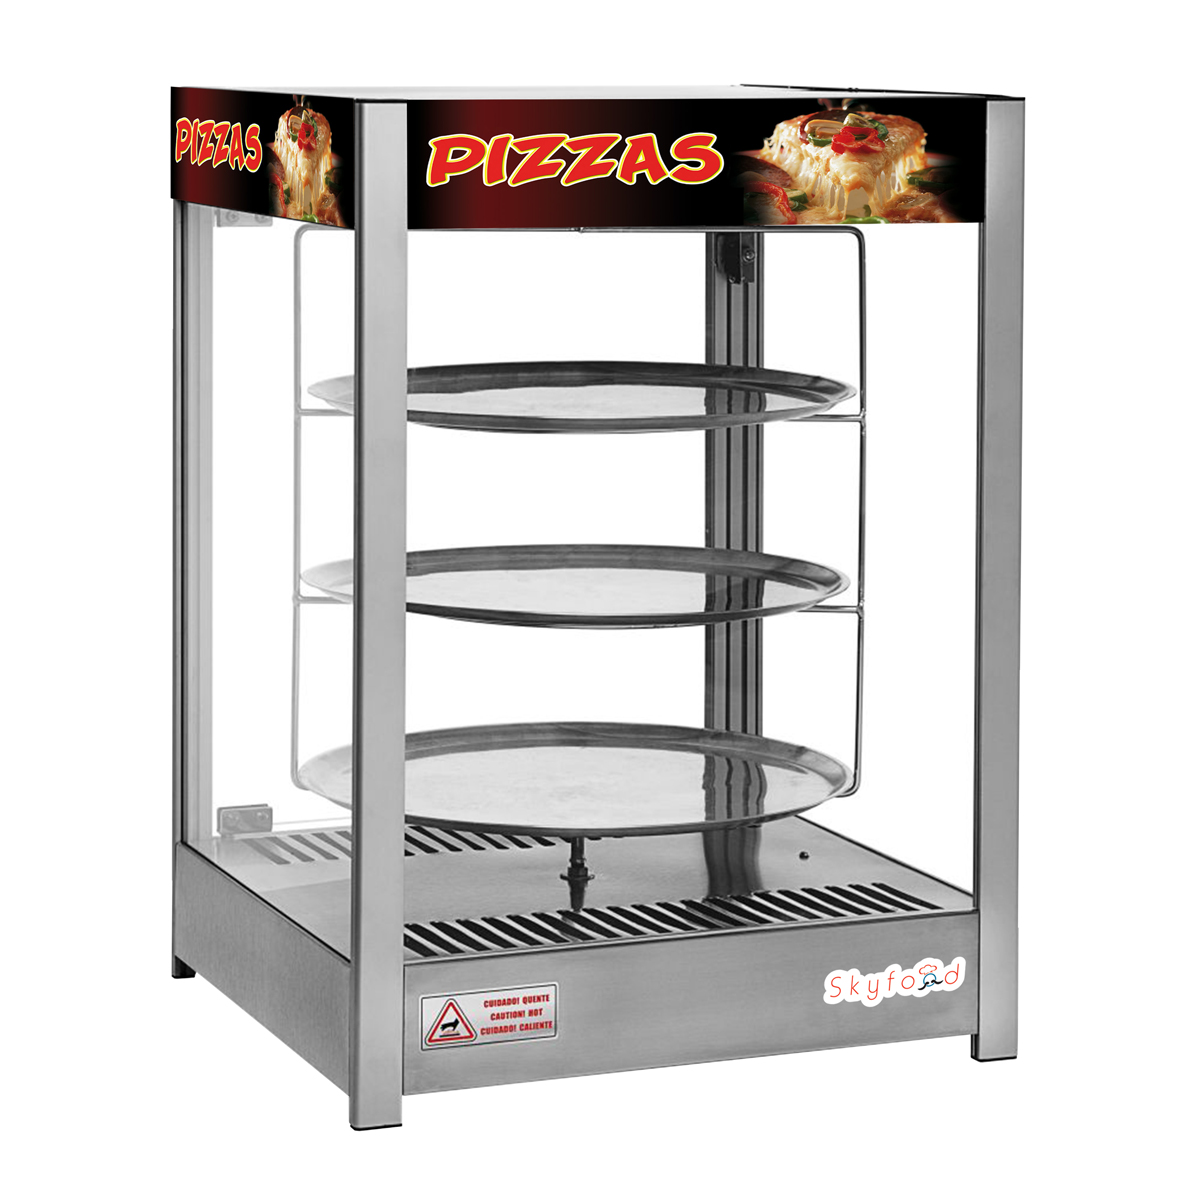 Skyfood PD3TS18 Pizza Display Case, Triple Tray 18" Steam Line